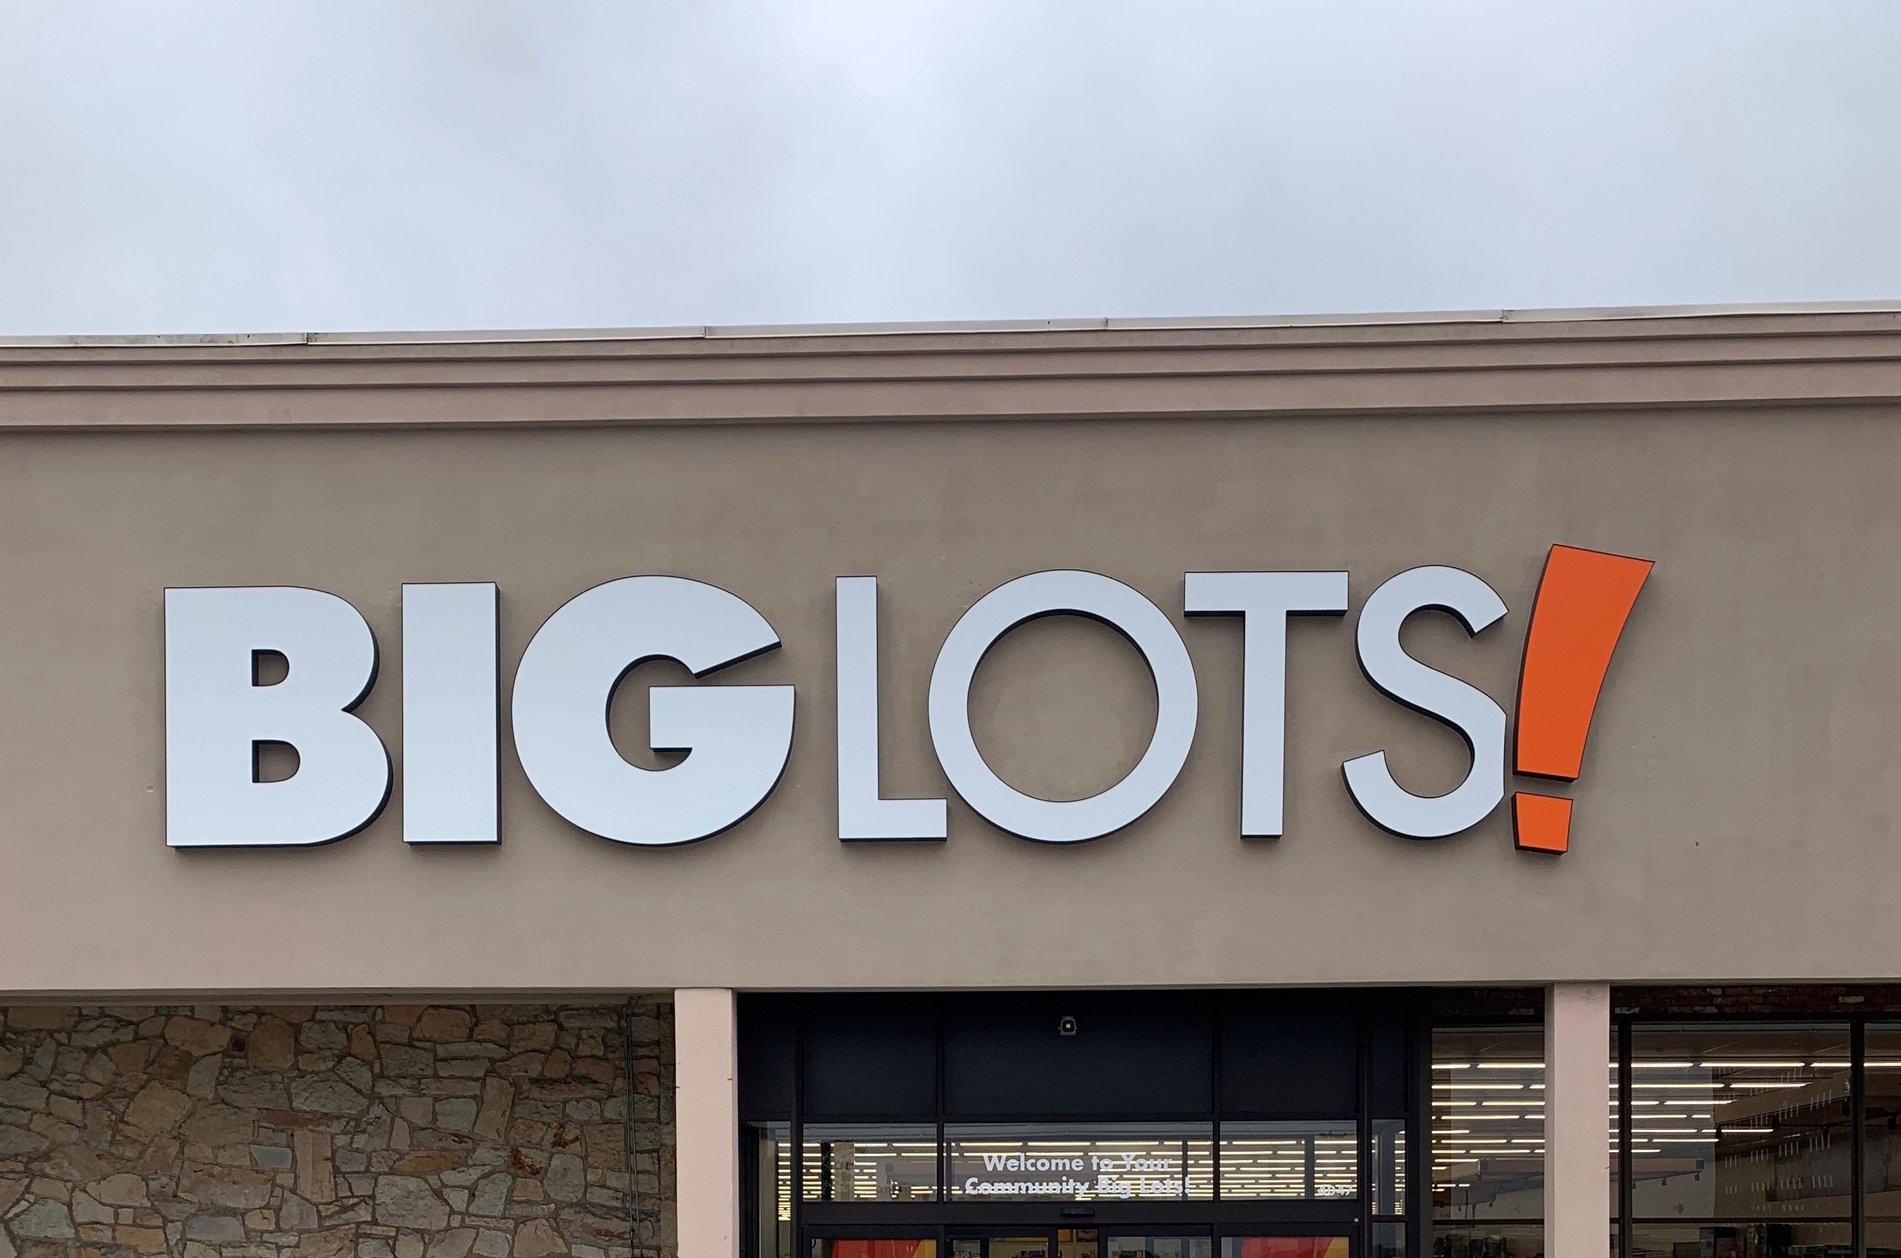 Visit The Big Lots in Monroeville, PA Located on William Penn Hwy